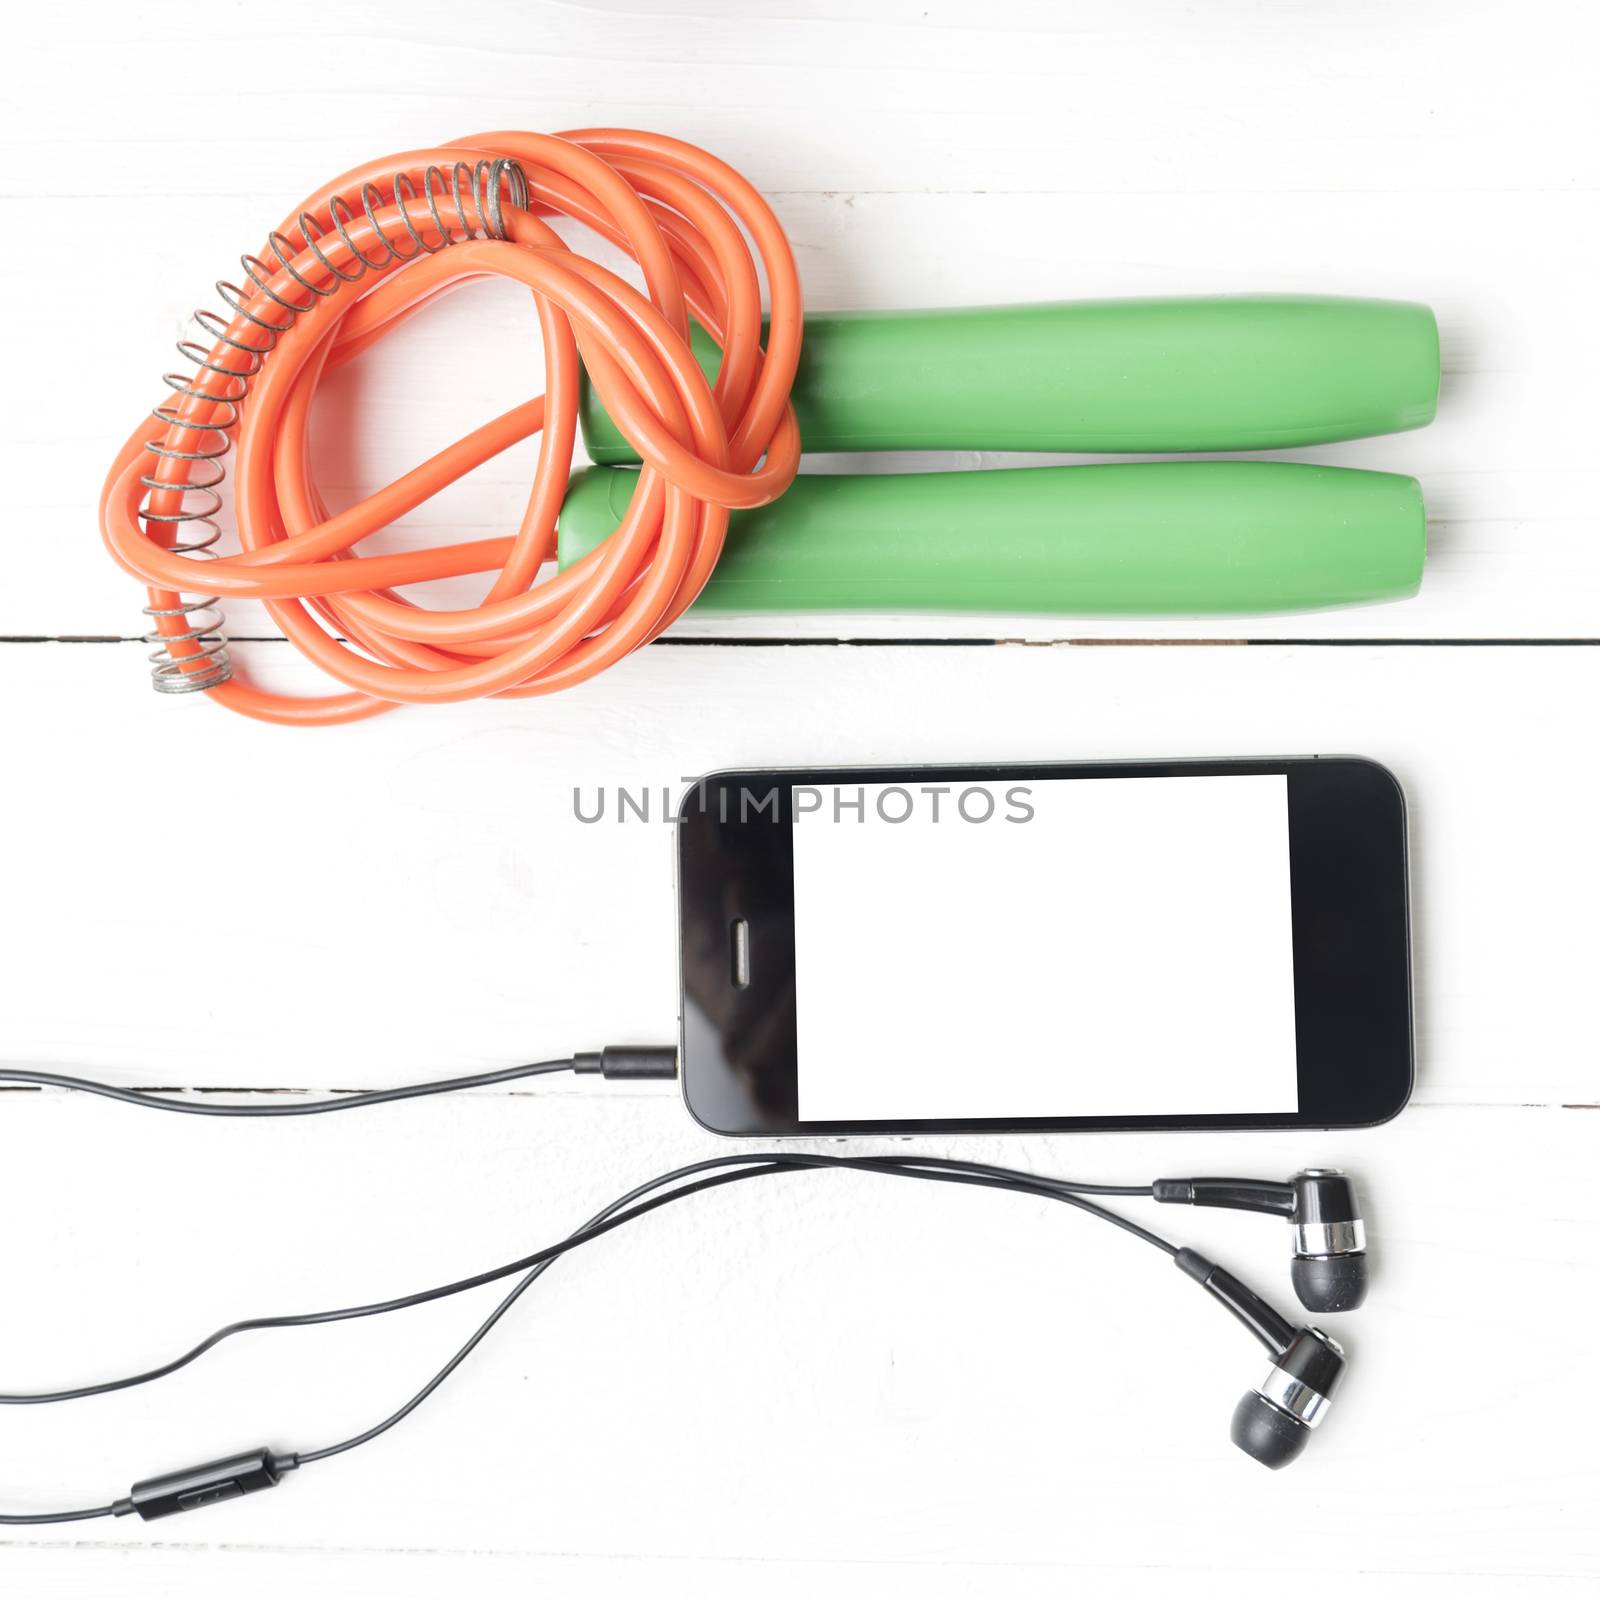 fitness equipment : jumping rope and phone on white wood table